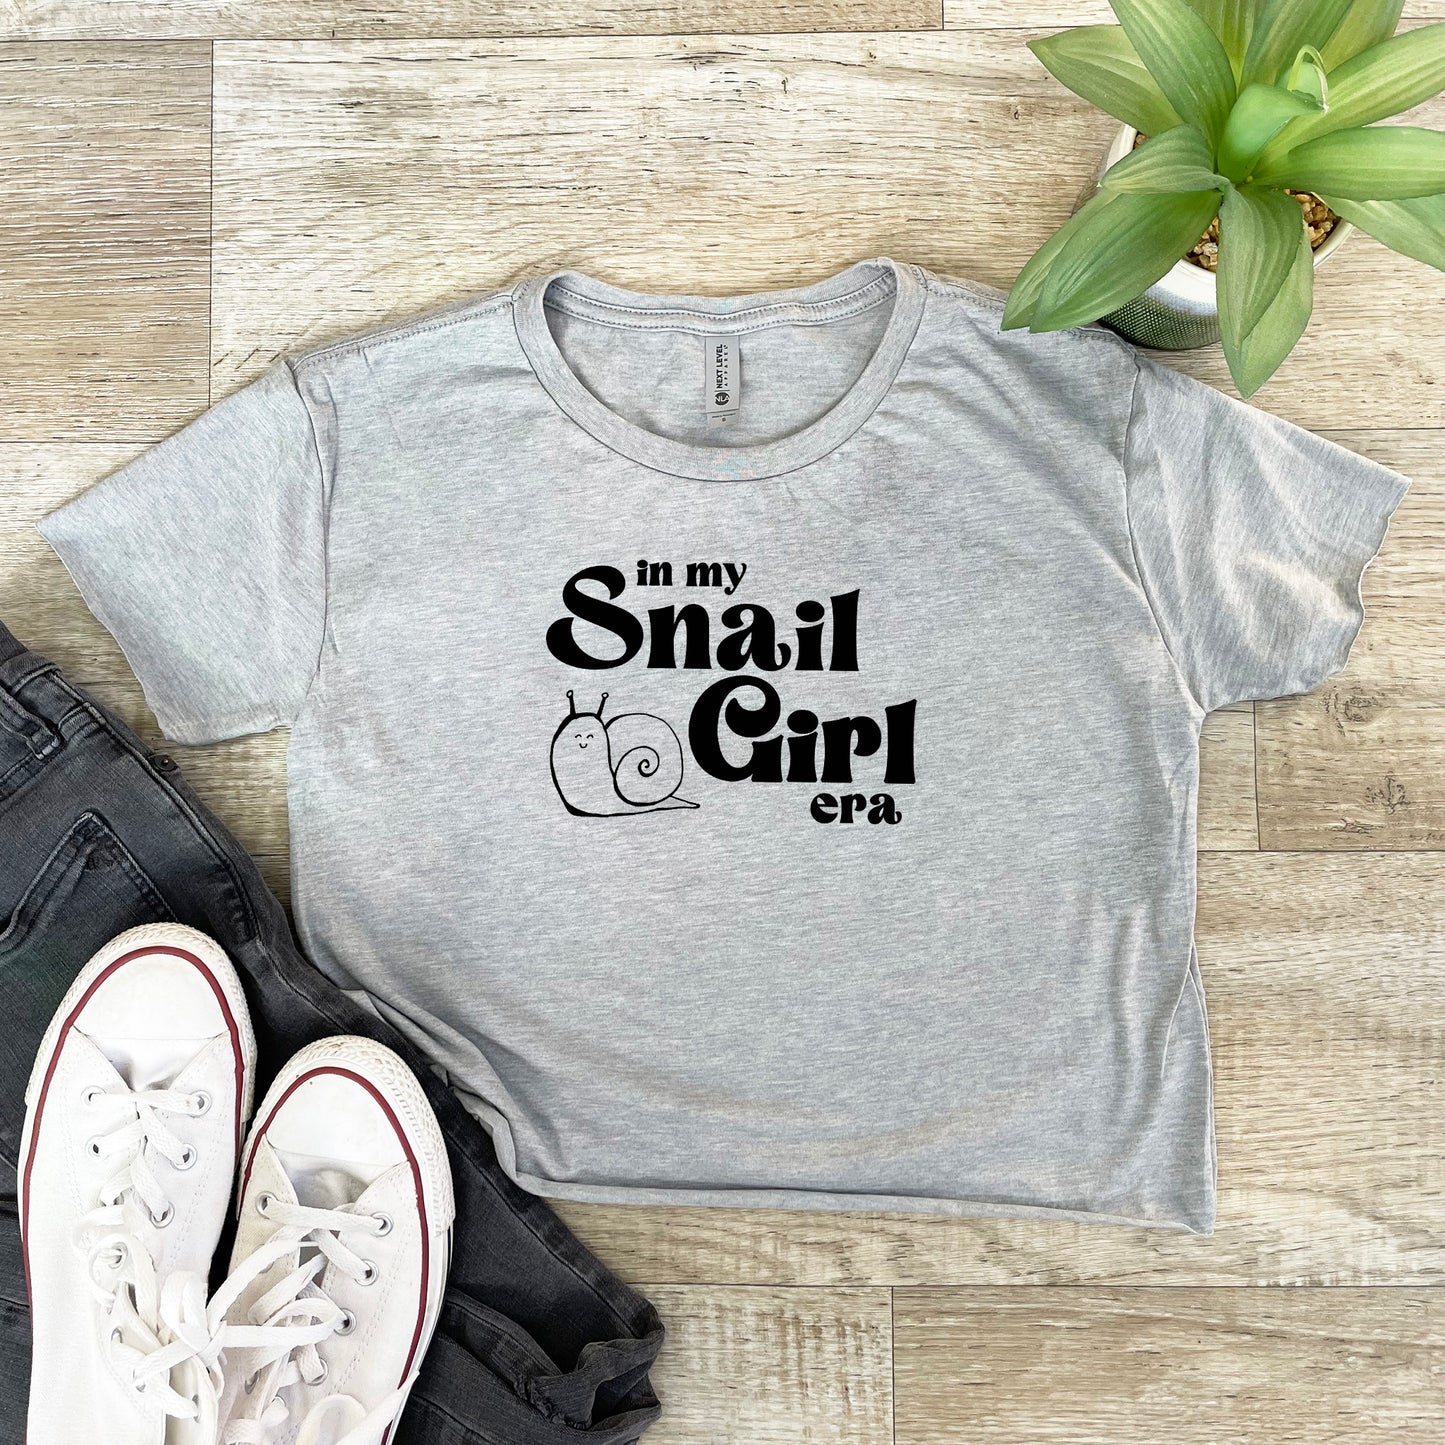 a t - shirt that says, i'm my snail girl